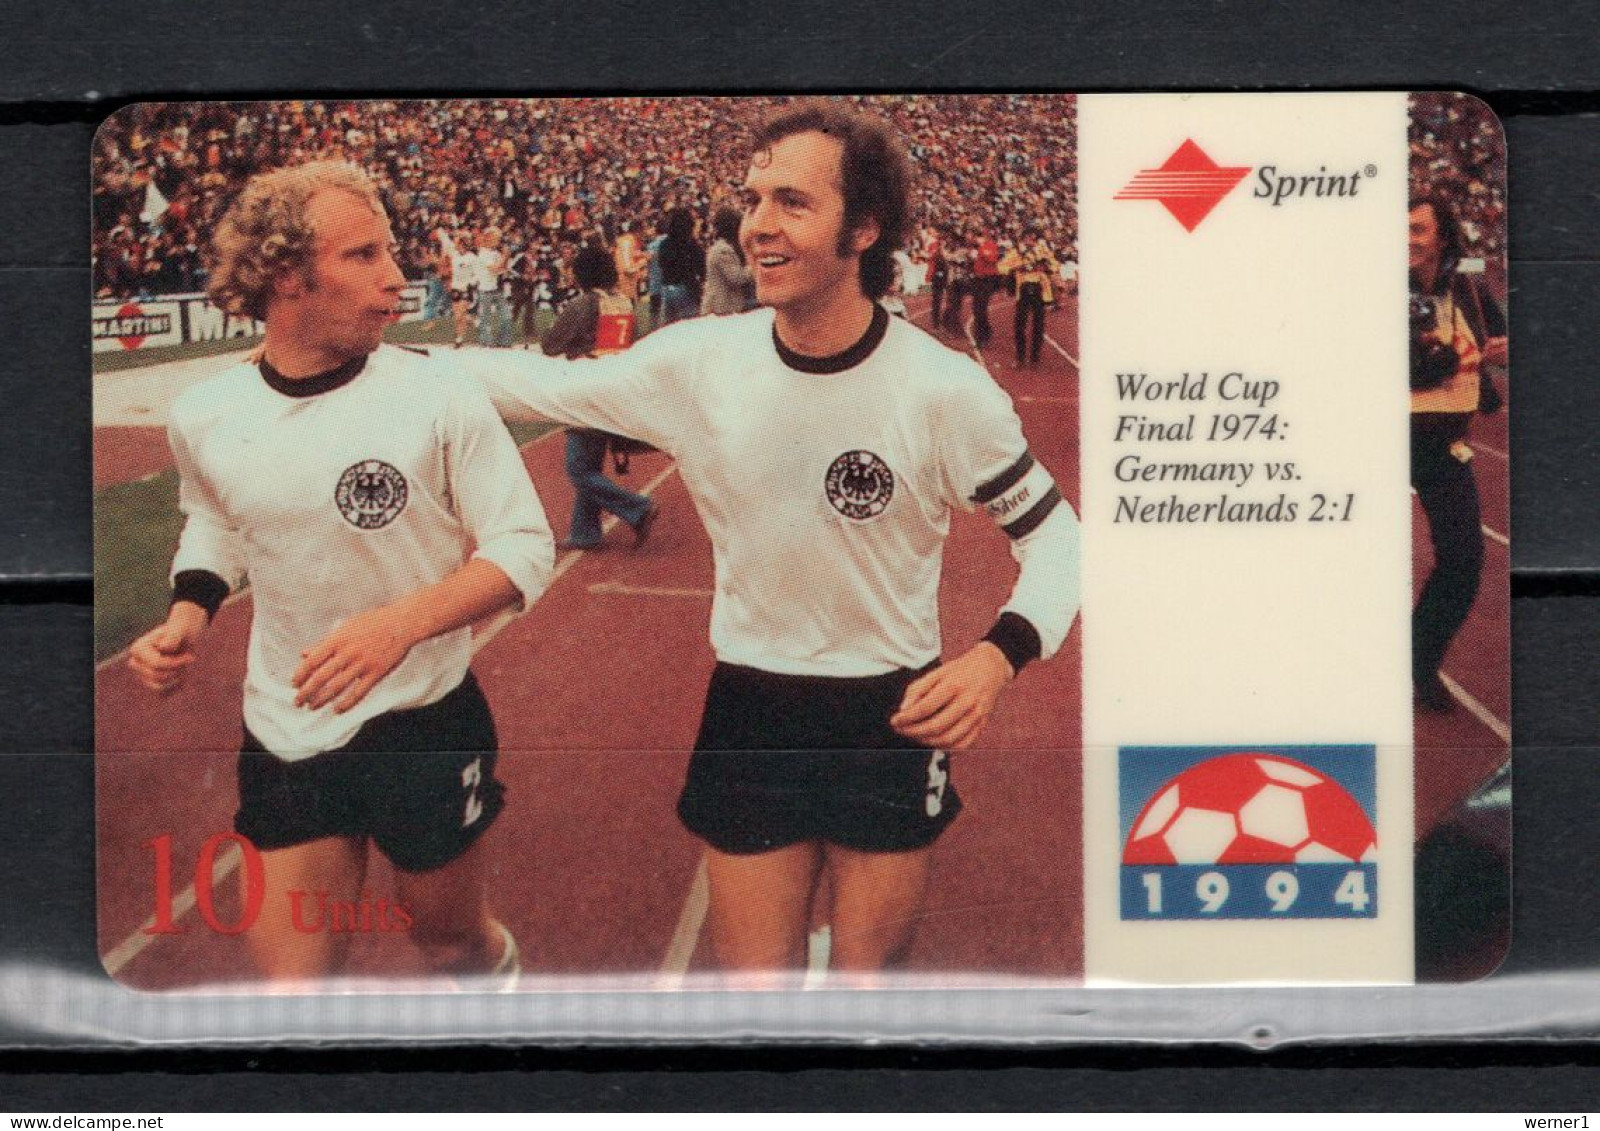 USA 1994 Football Soccer World Cup Phonecard With Franz Beckenbauer And Berti Vogts - Deportes